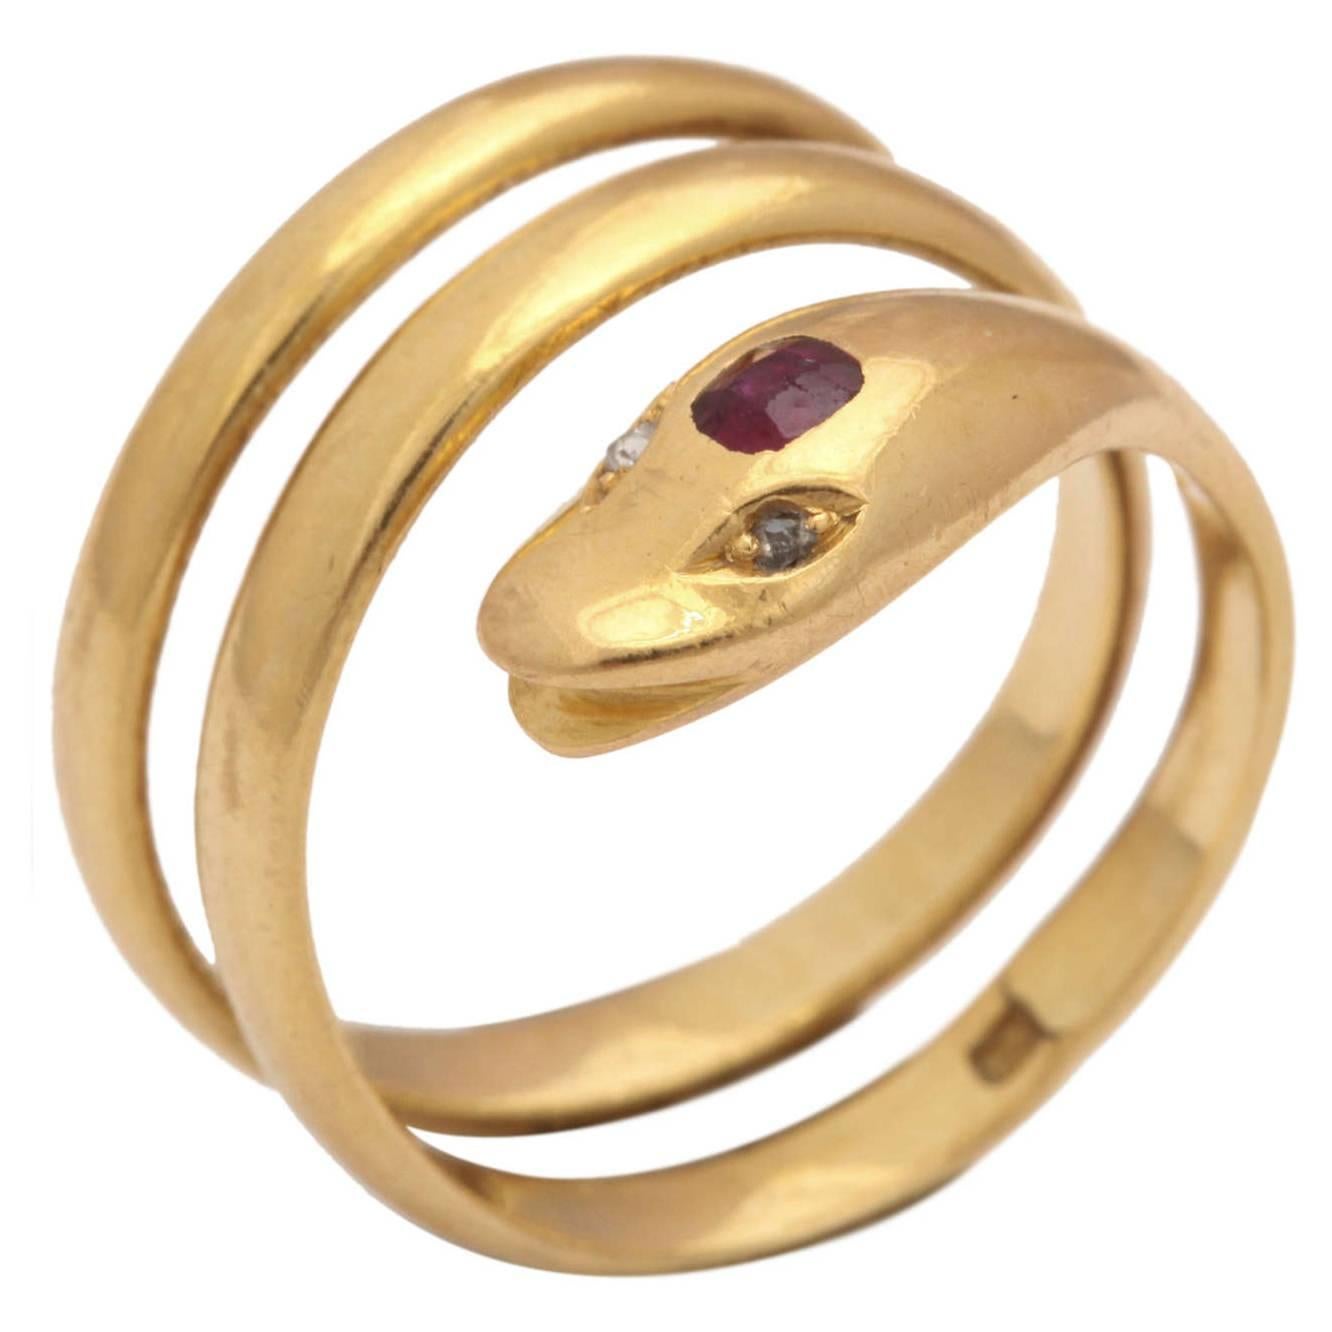 Antique 18kt Serpent Ring, Diamond Eyes, Ruby Forehead